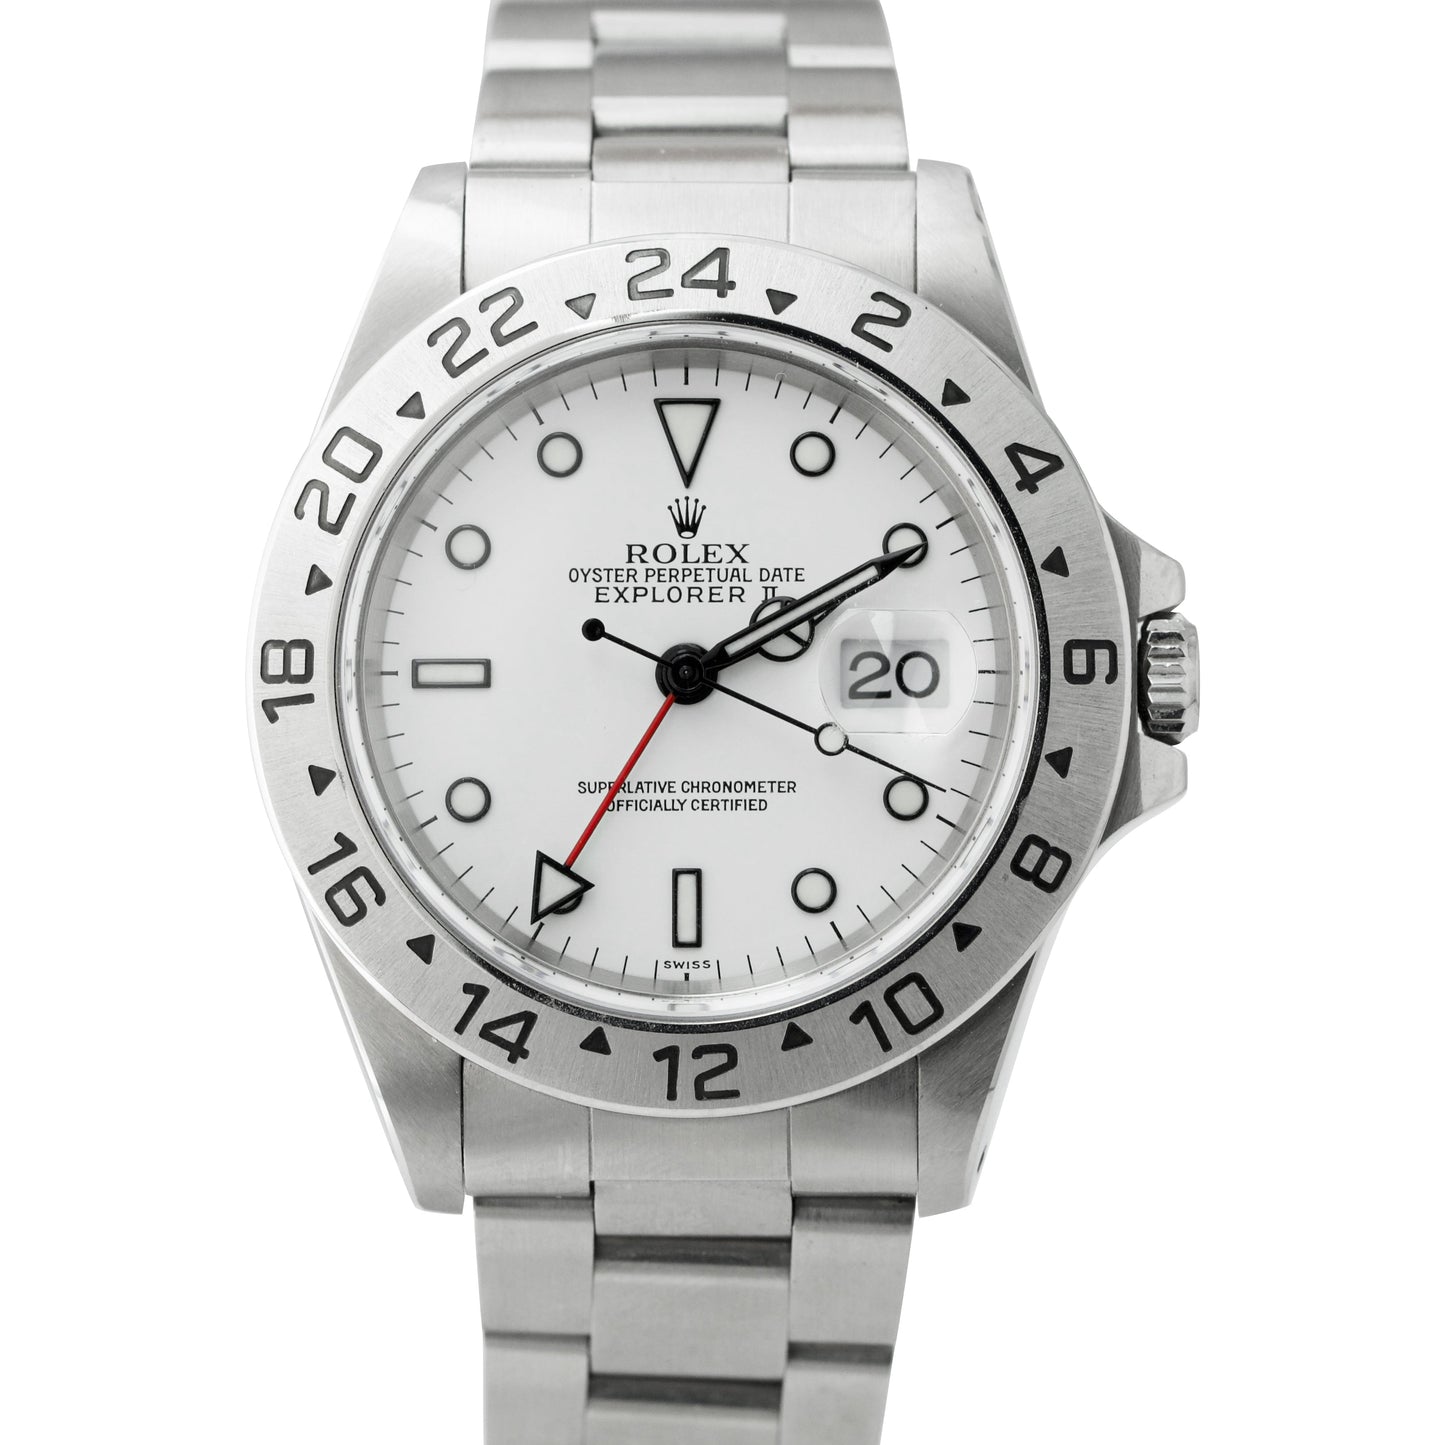 Rolex Explorer II Polar White SWISS ONLY A SERIAL GMT 40mm Stainless Watch 16570